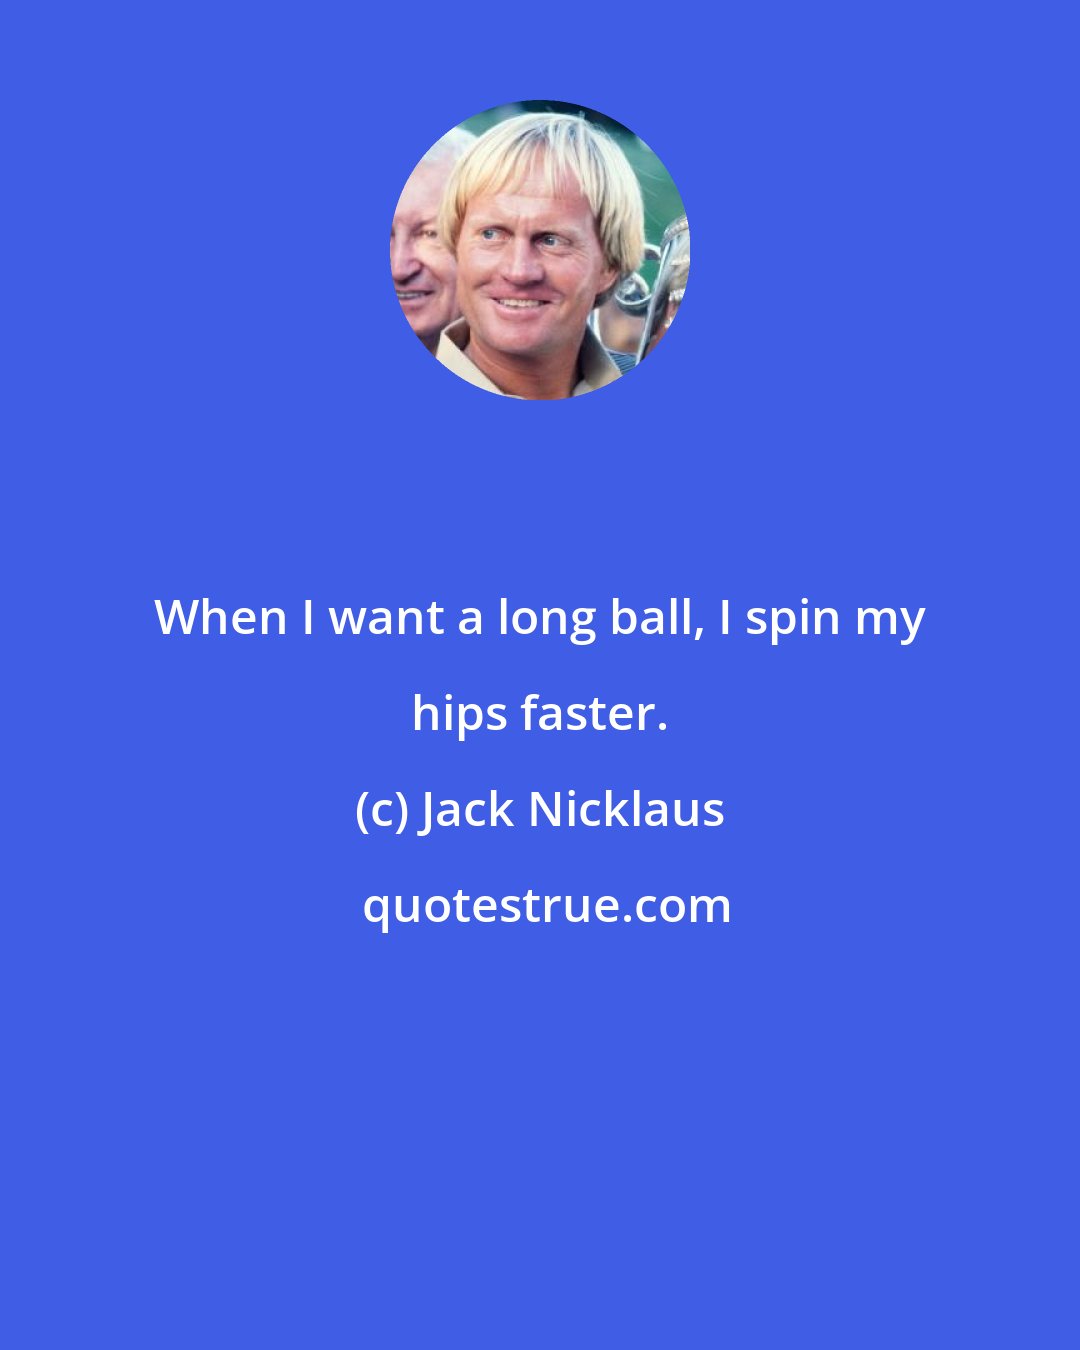 Jack Nicklaus: When I want a long ball, I spin my hips faster.